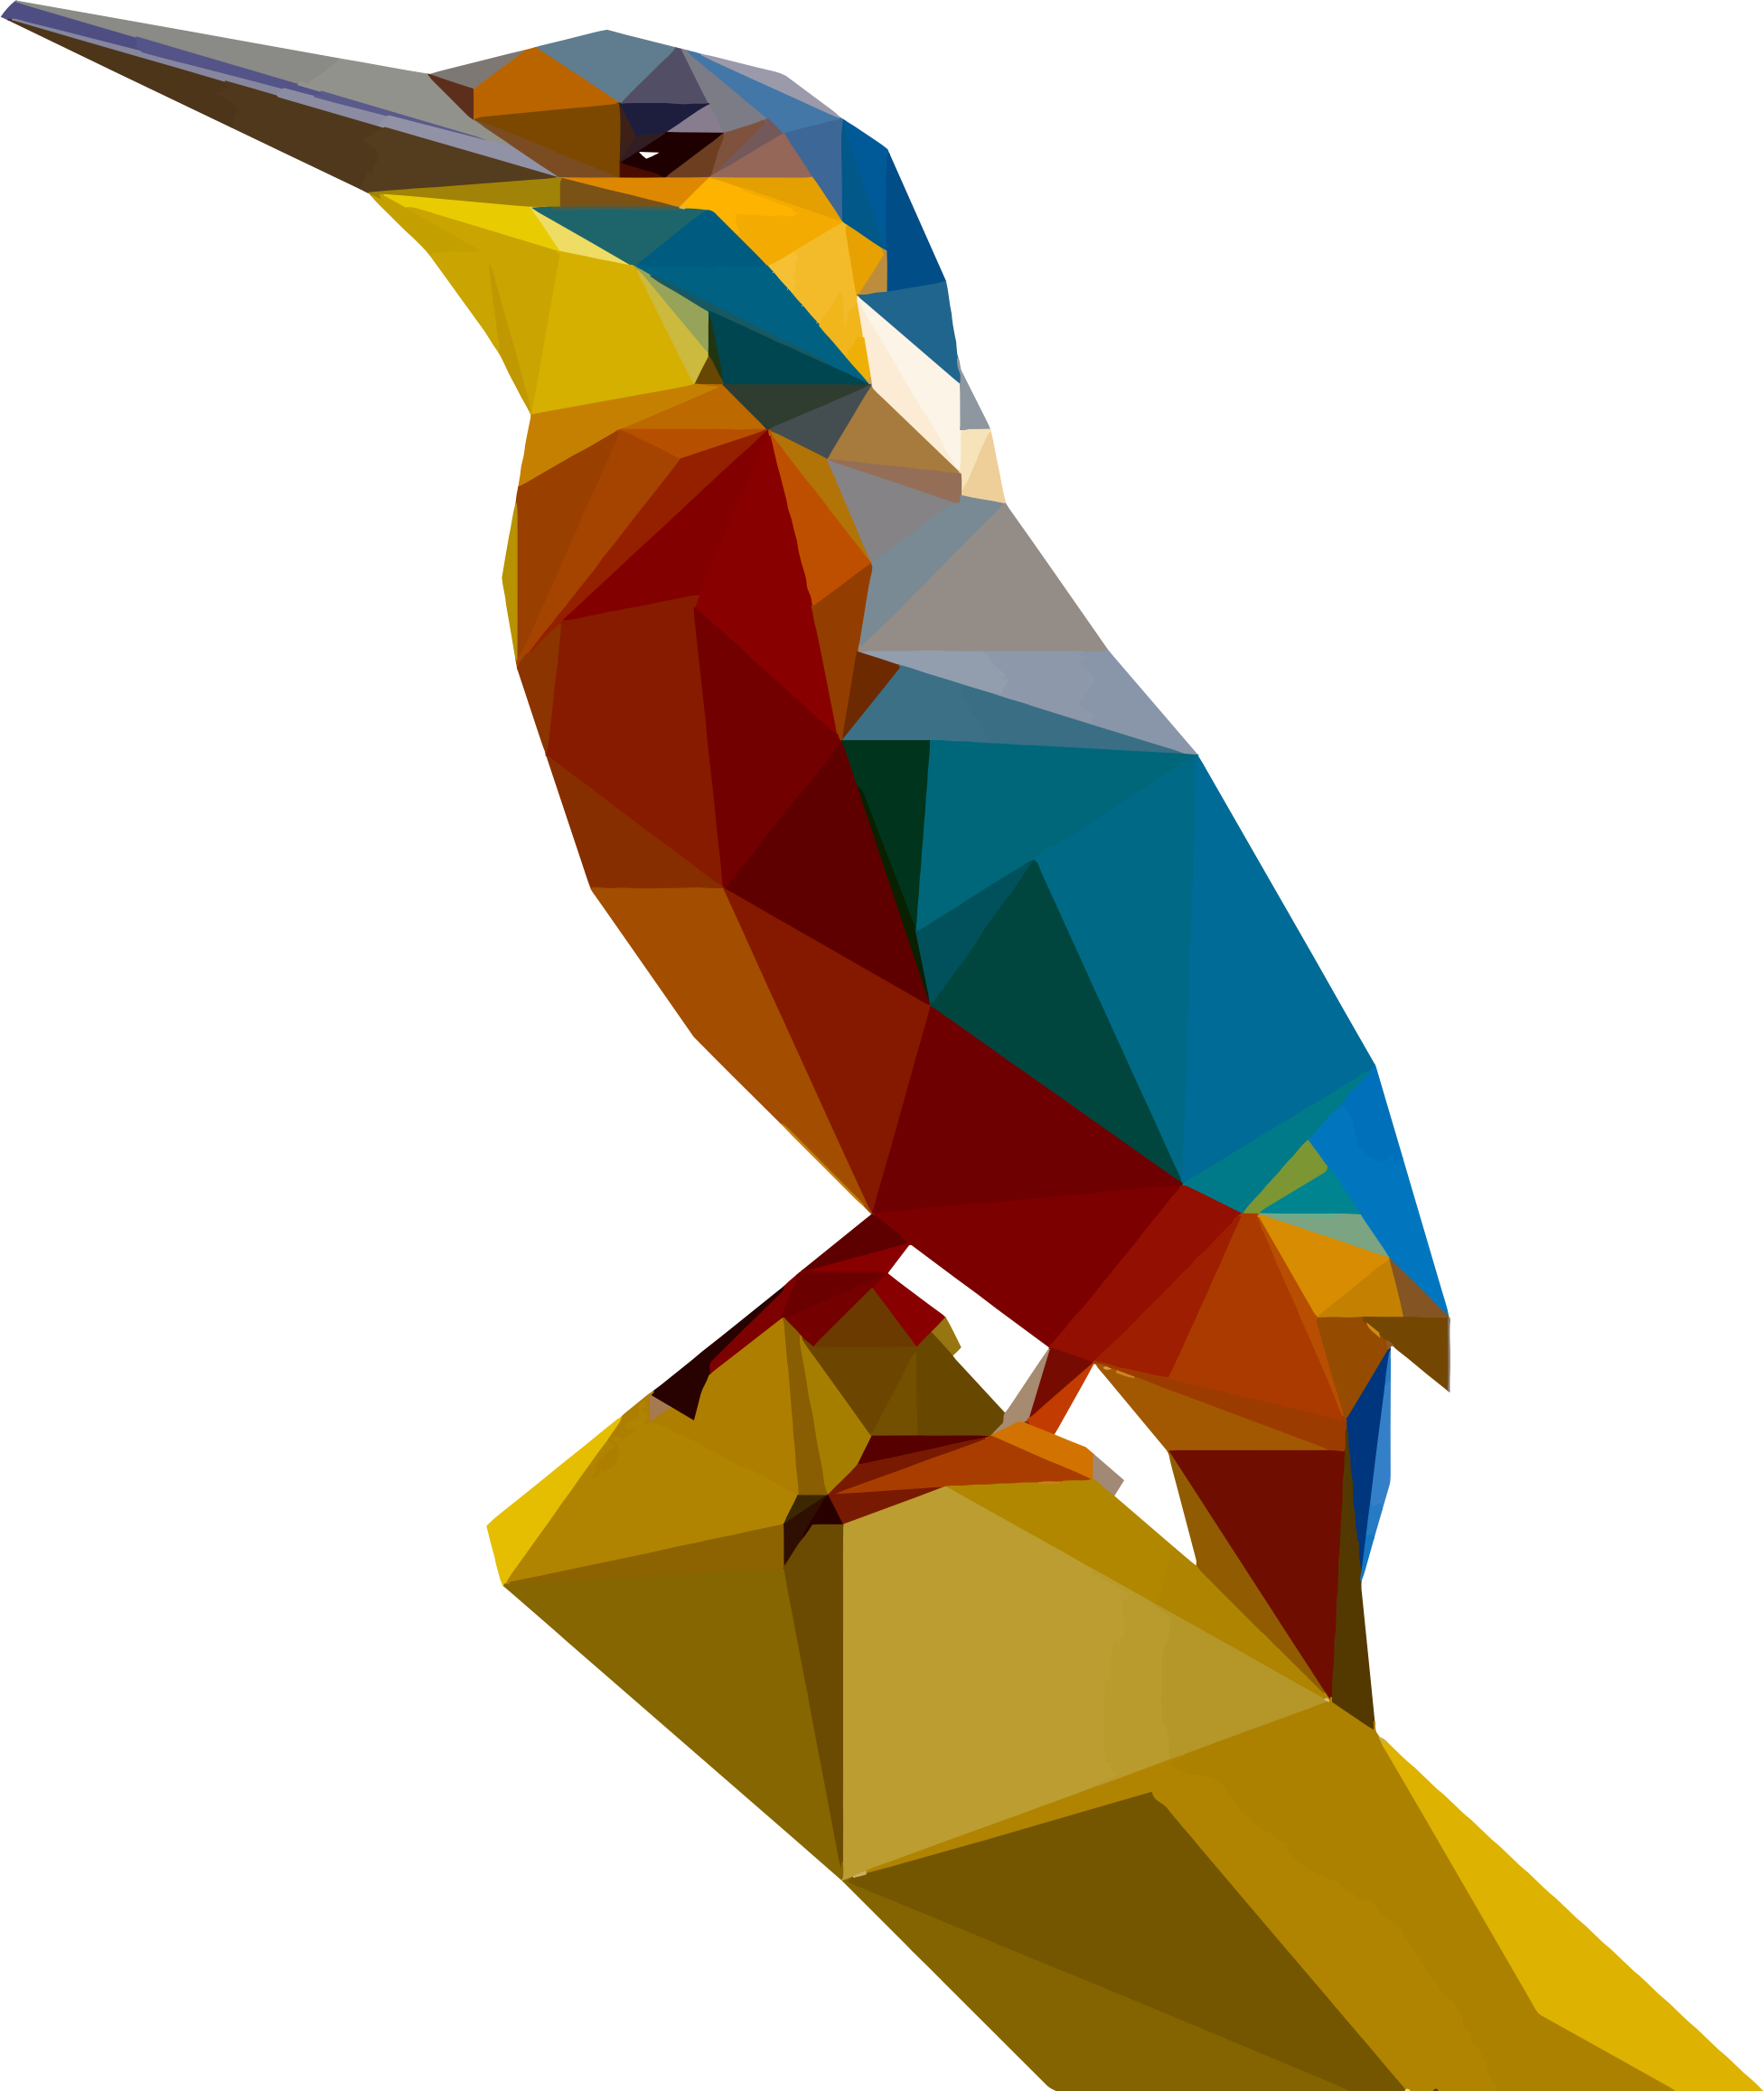 Kingfisher Image PNG File HD PNG Image